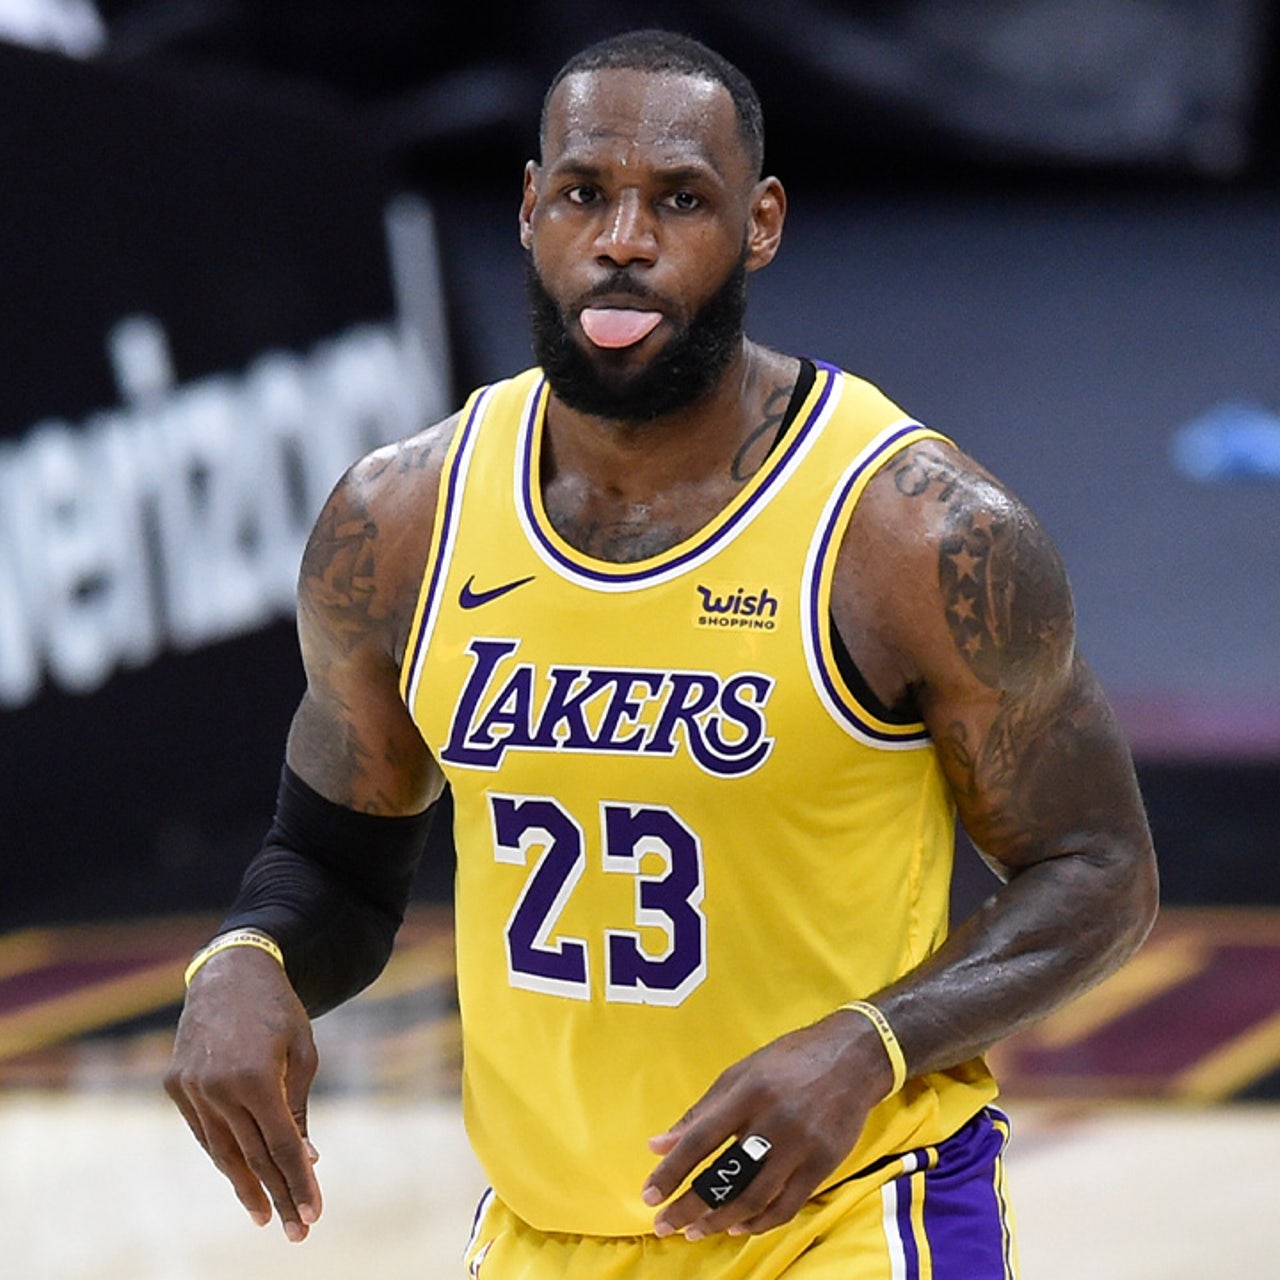 LeBron James ejected for 'unnecessary, excessive' contact on